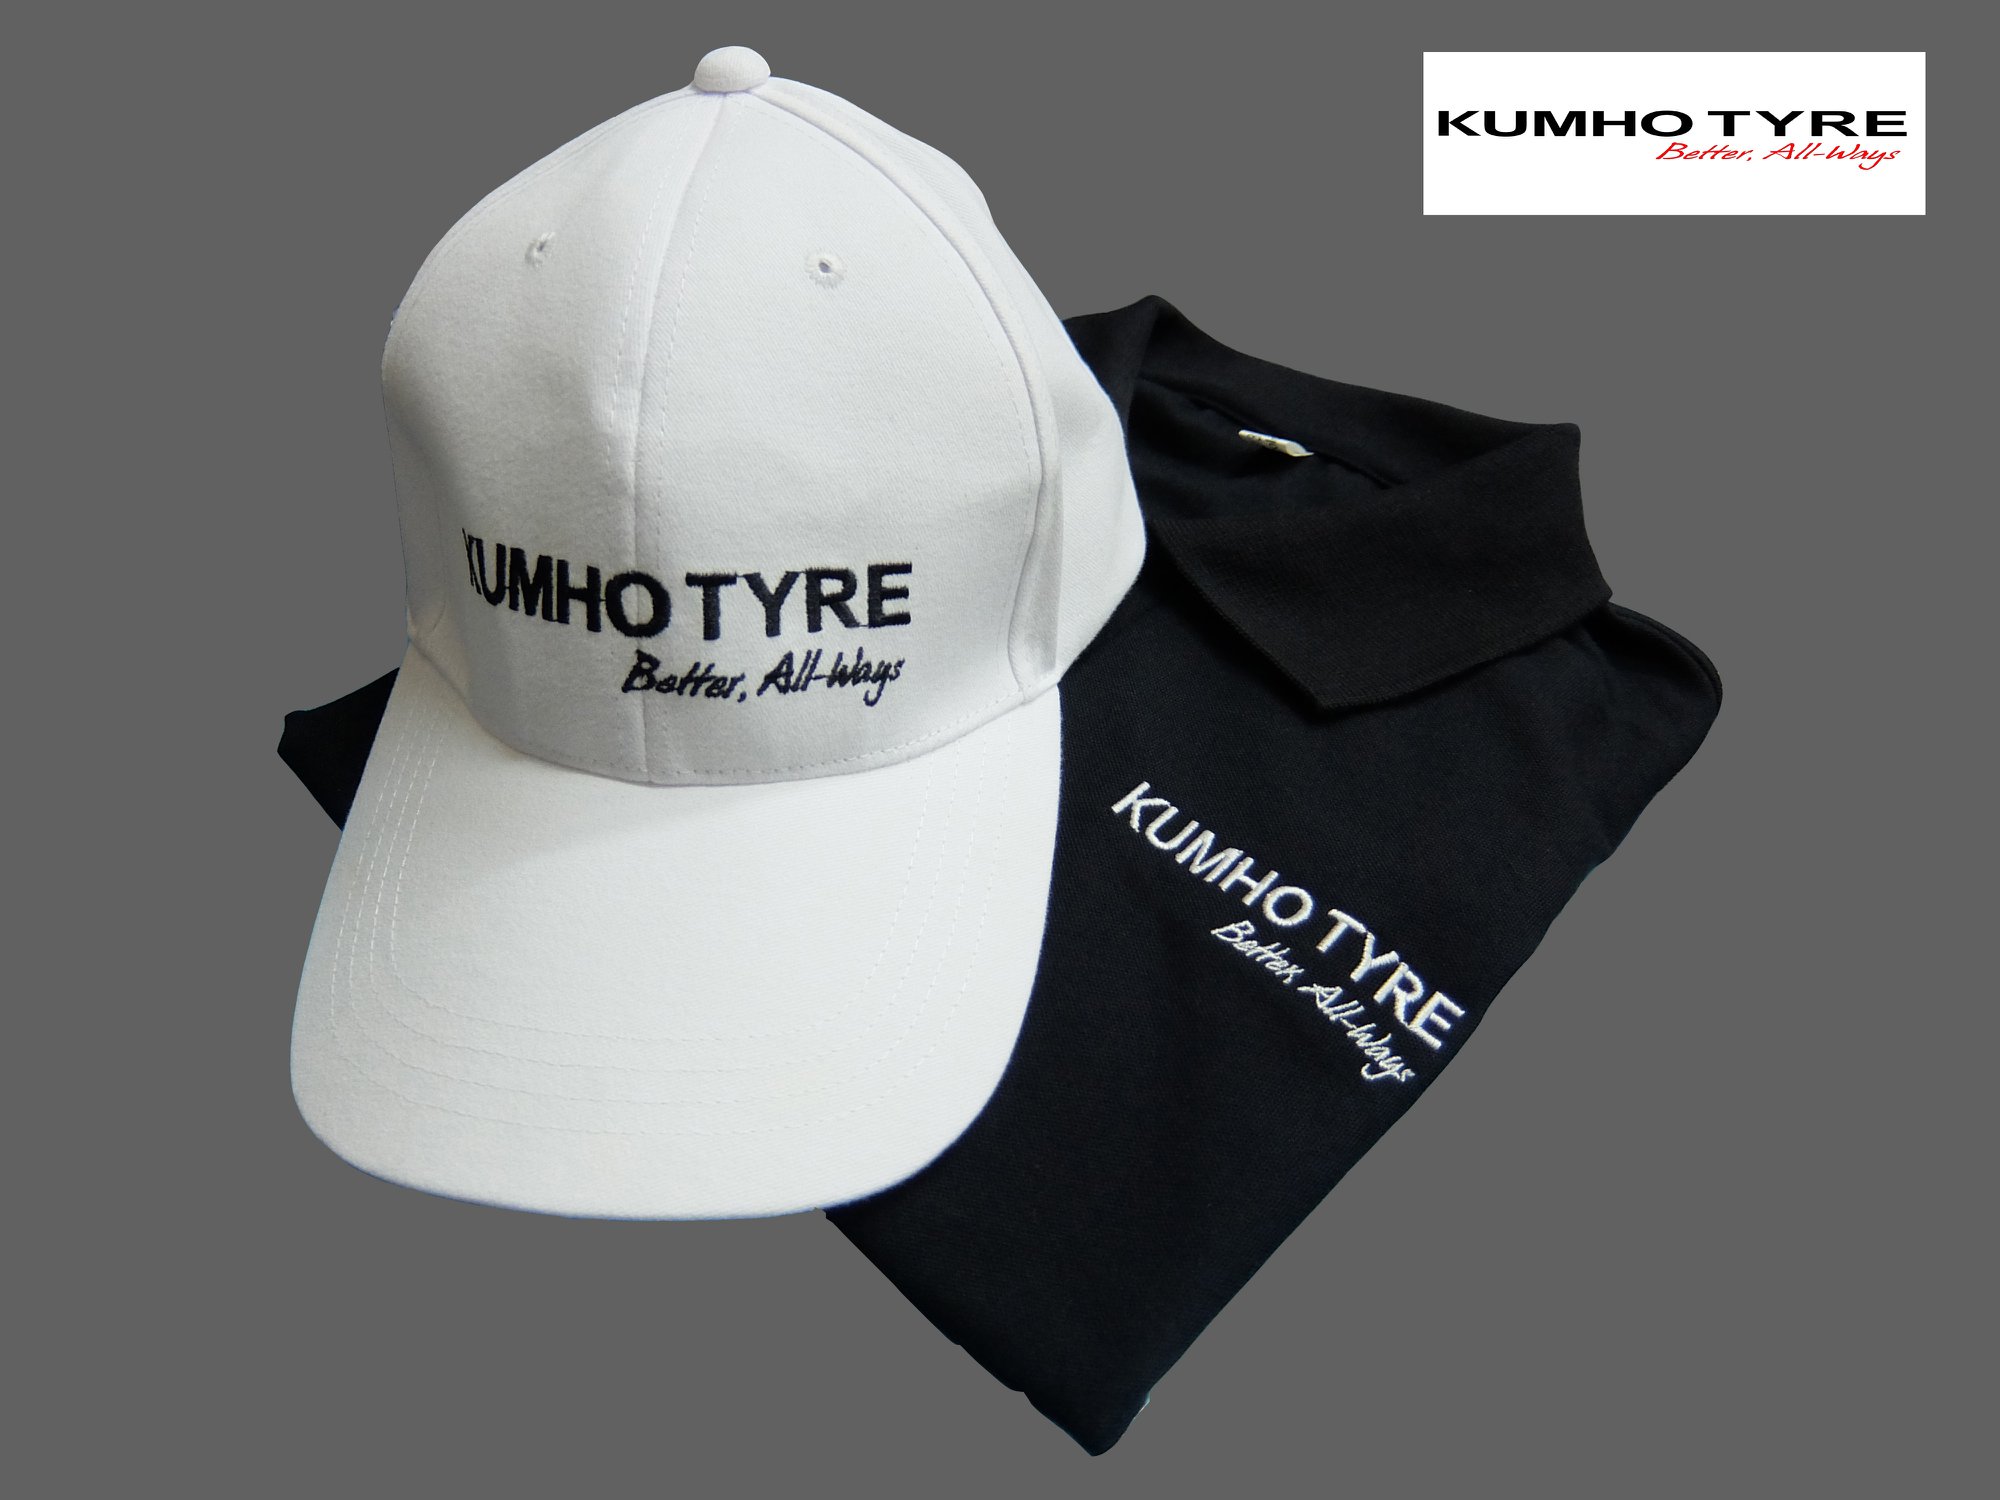 Ready to travel together?
 Kumho Tyre. Better,All-Ways
 #KumhoThailand